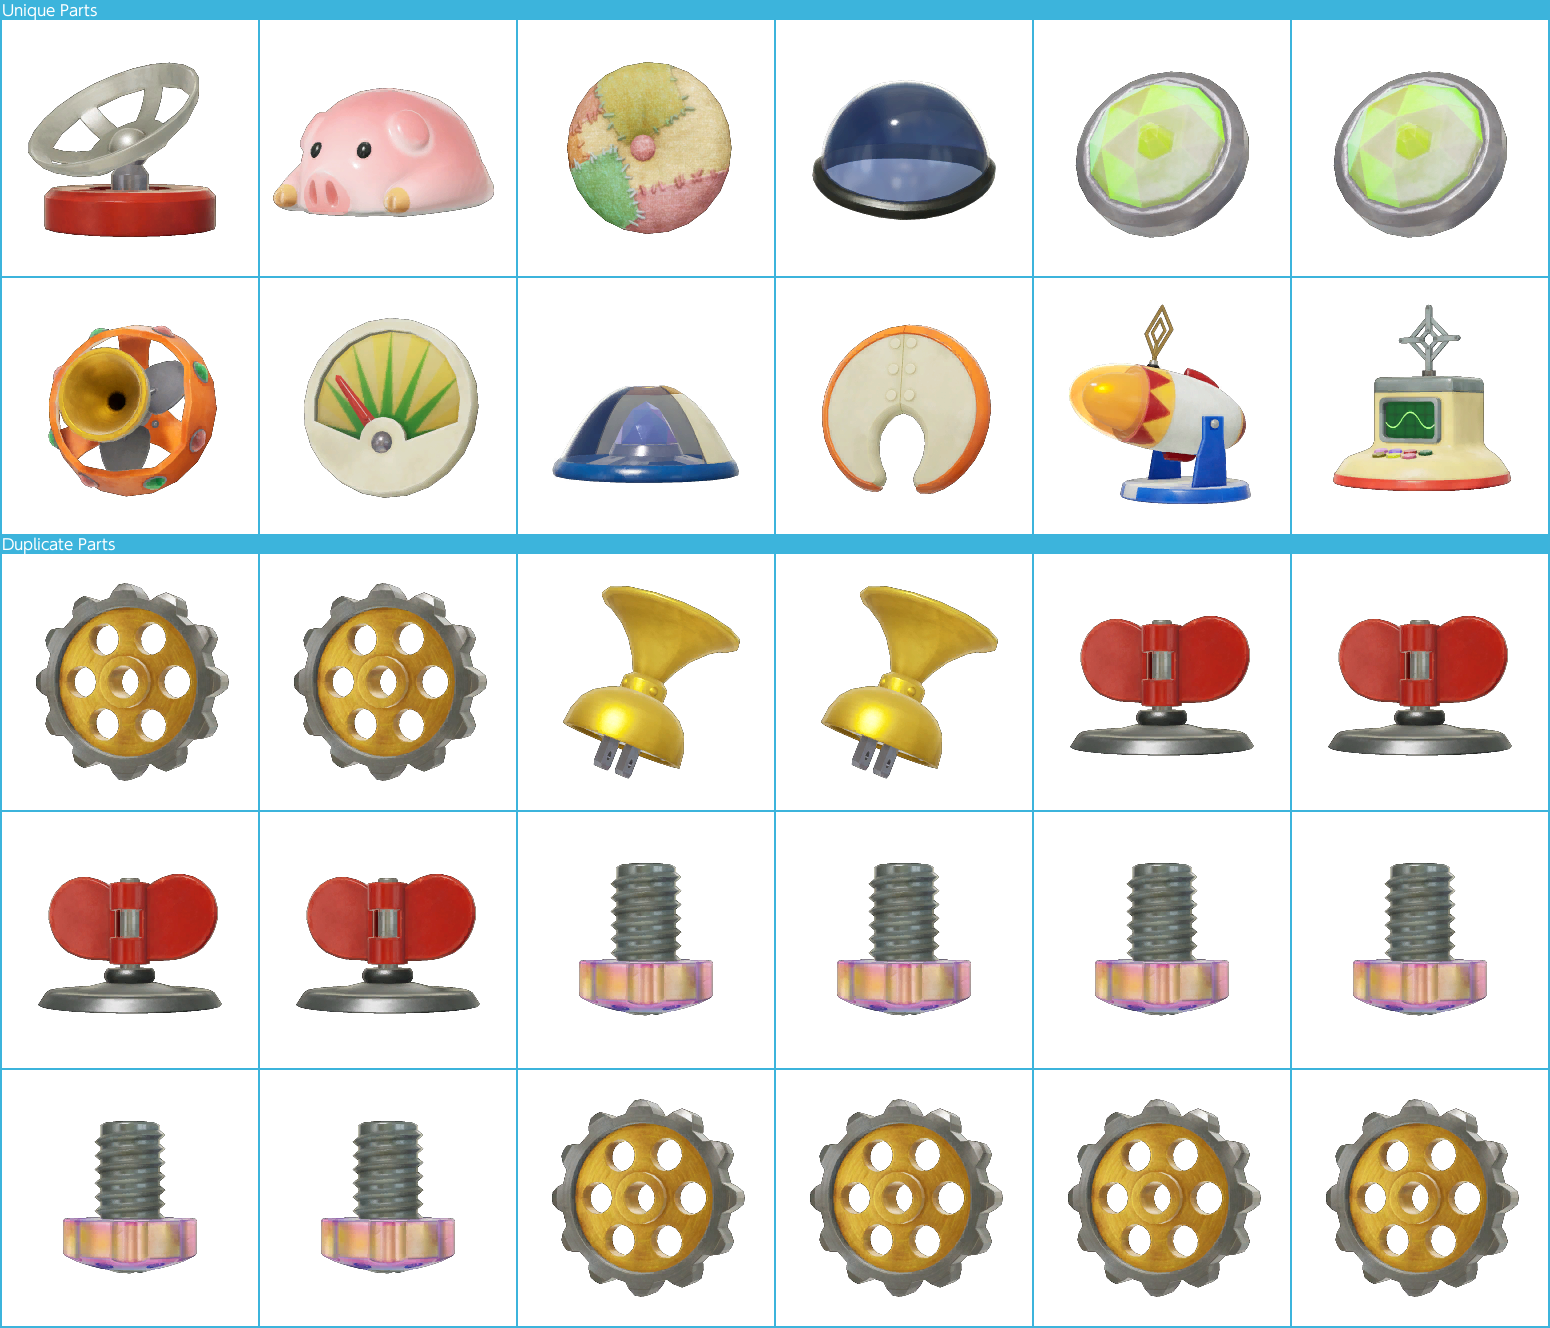 Ship Part Icons